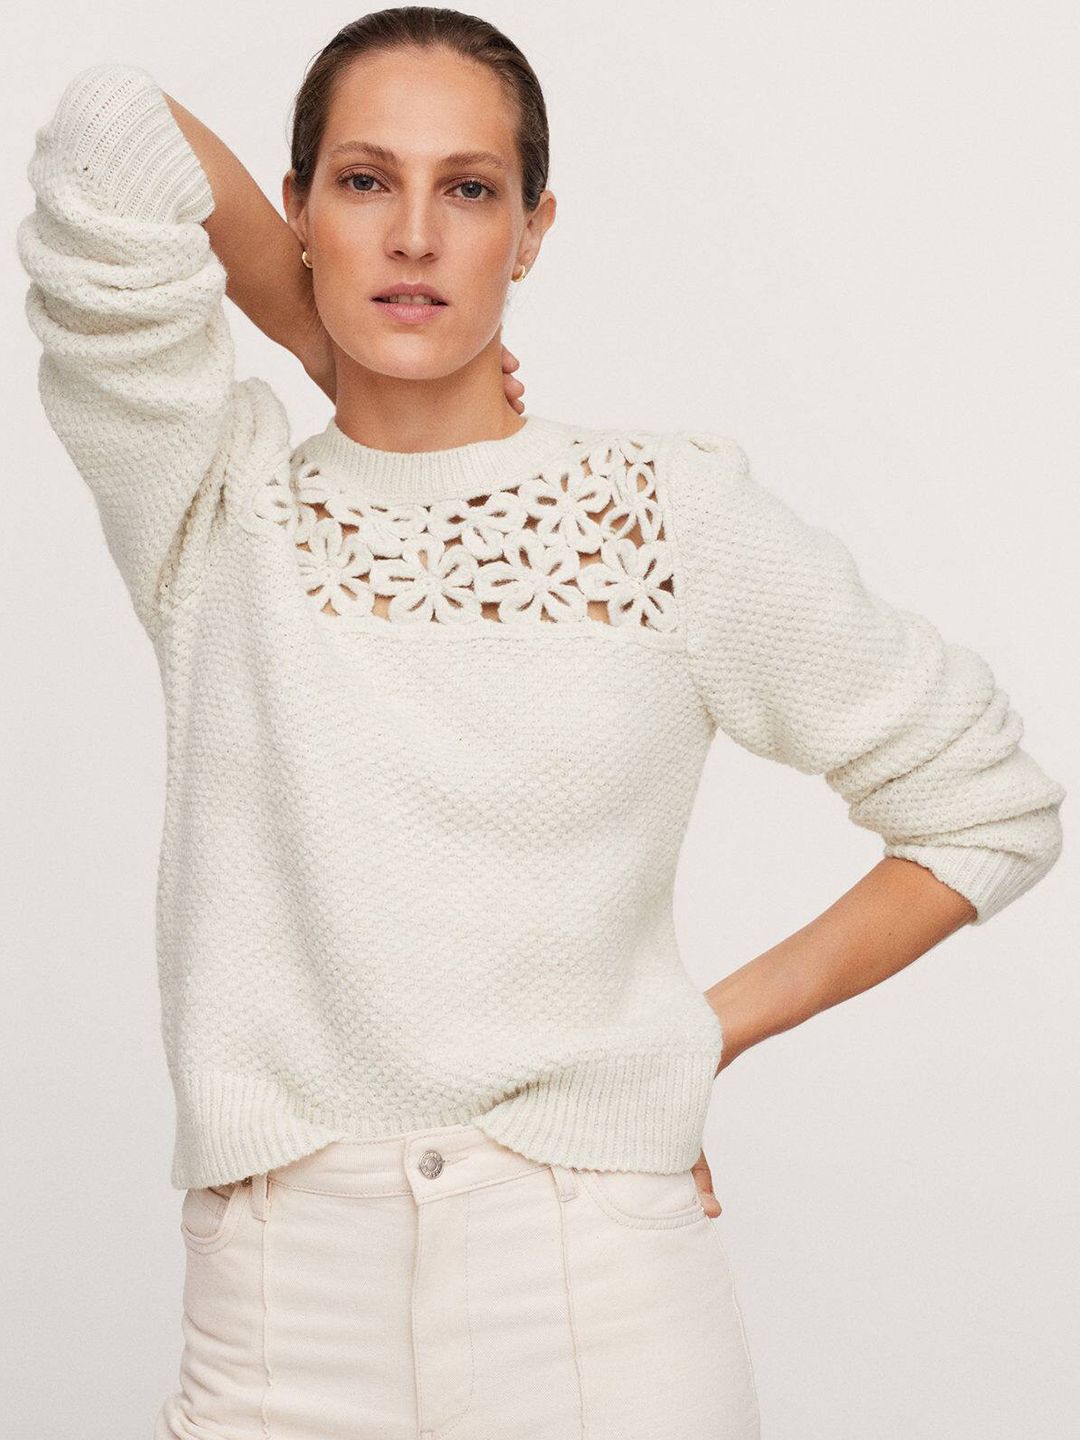 MANGO Women White Floral Knit Pullover Price in India